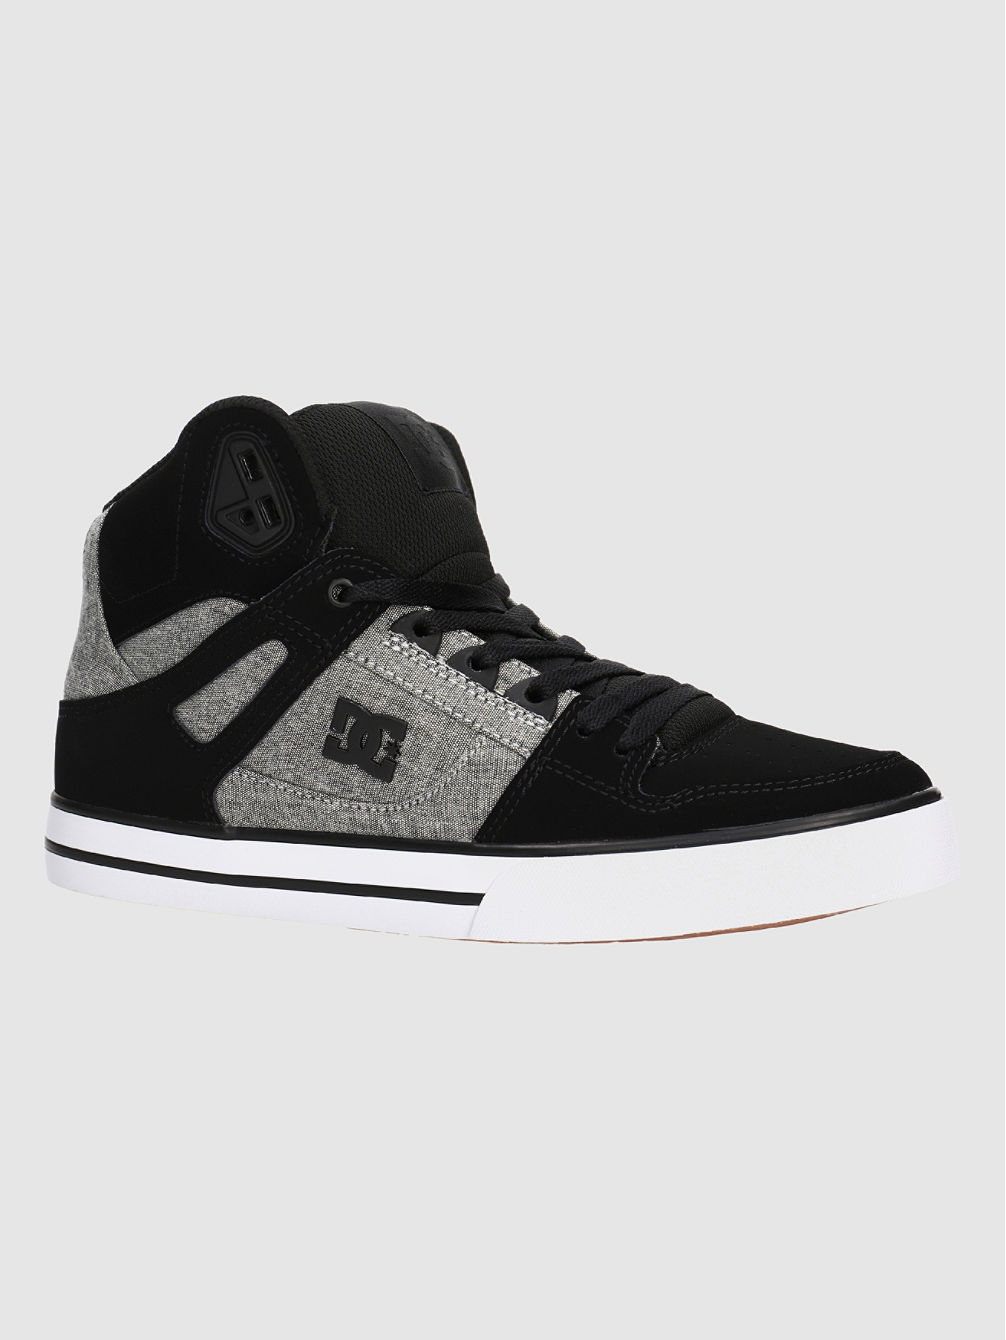 Pure High-Top WC Skate Shoes